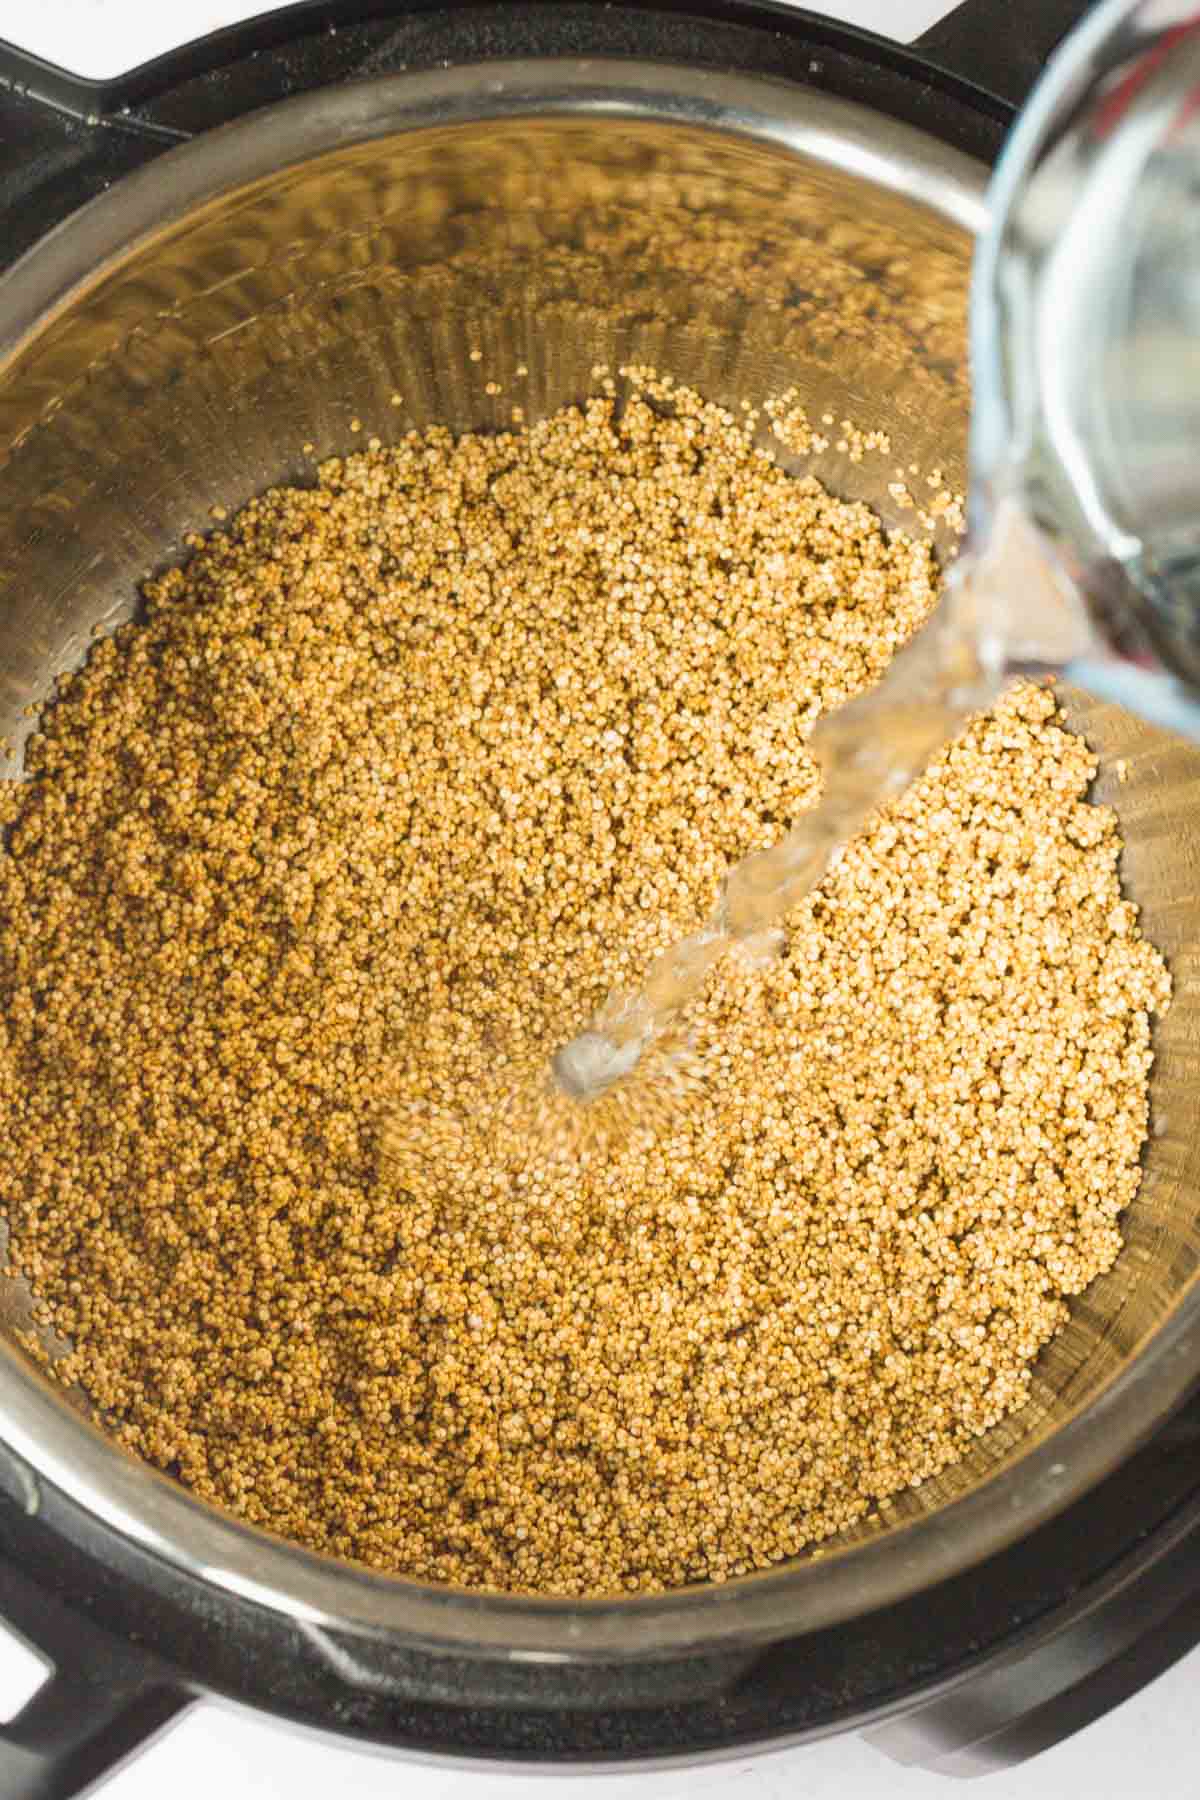 Cooking quinoa in the instant pot